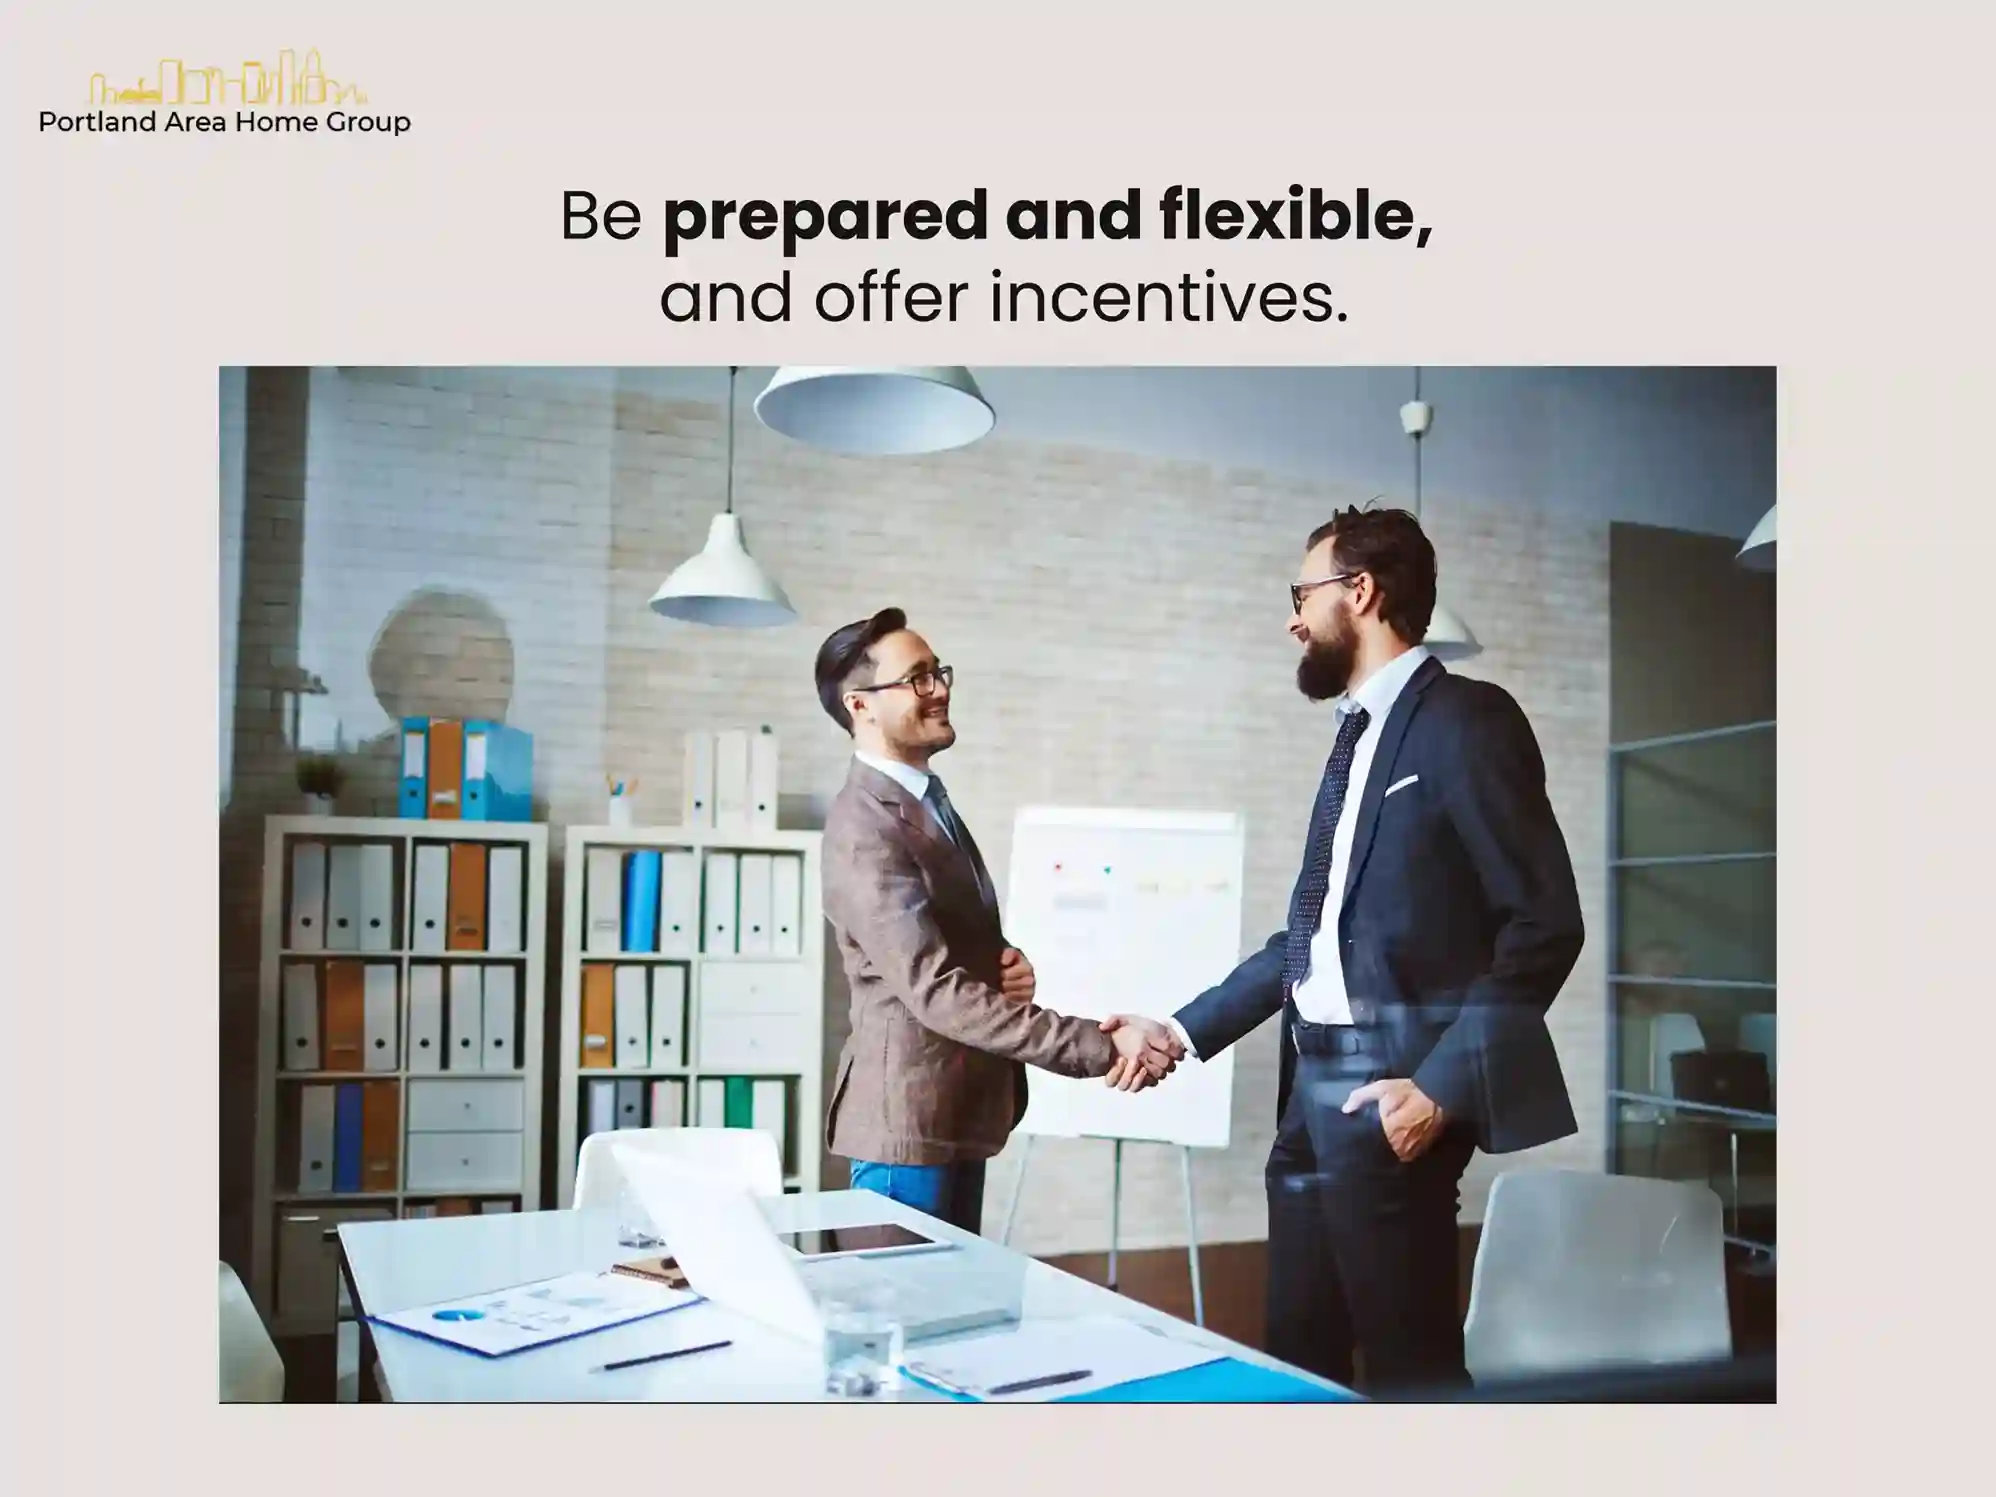 Be prepared and flexible, and offer incentives